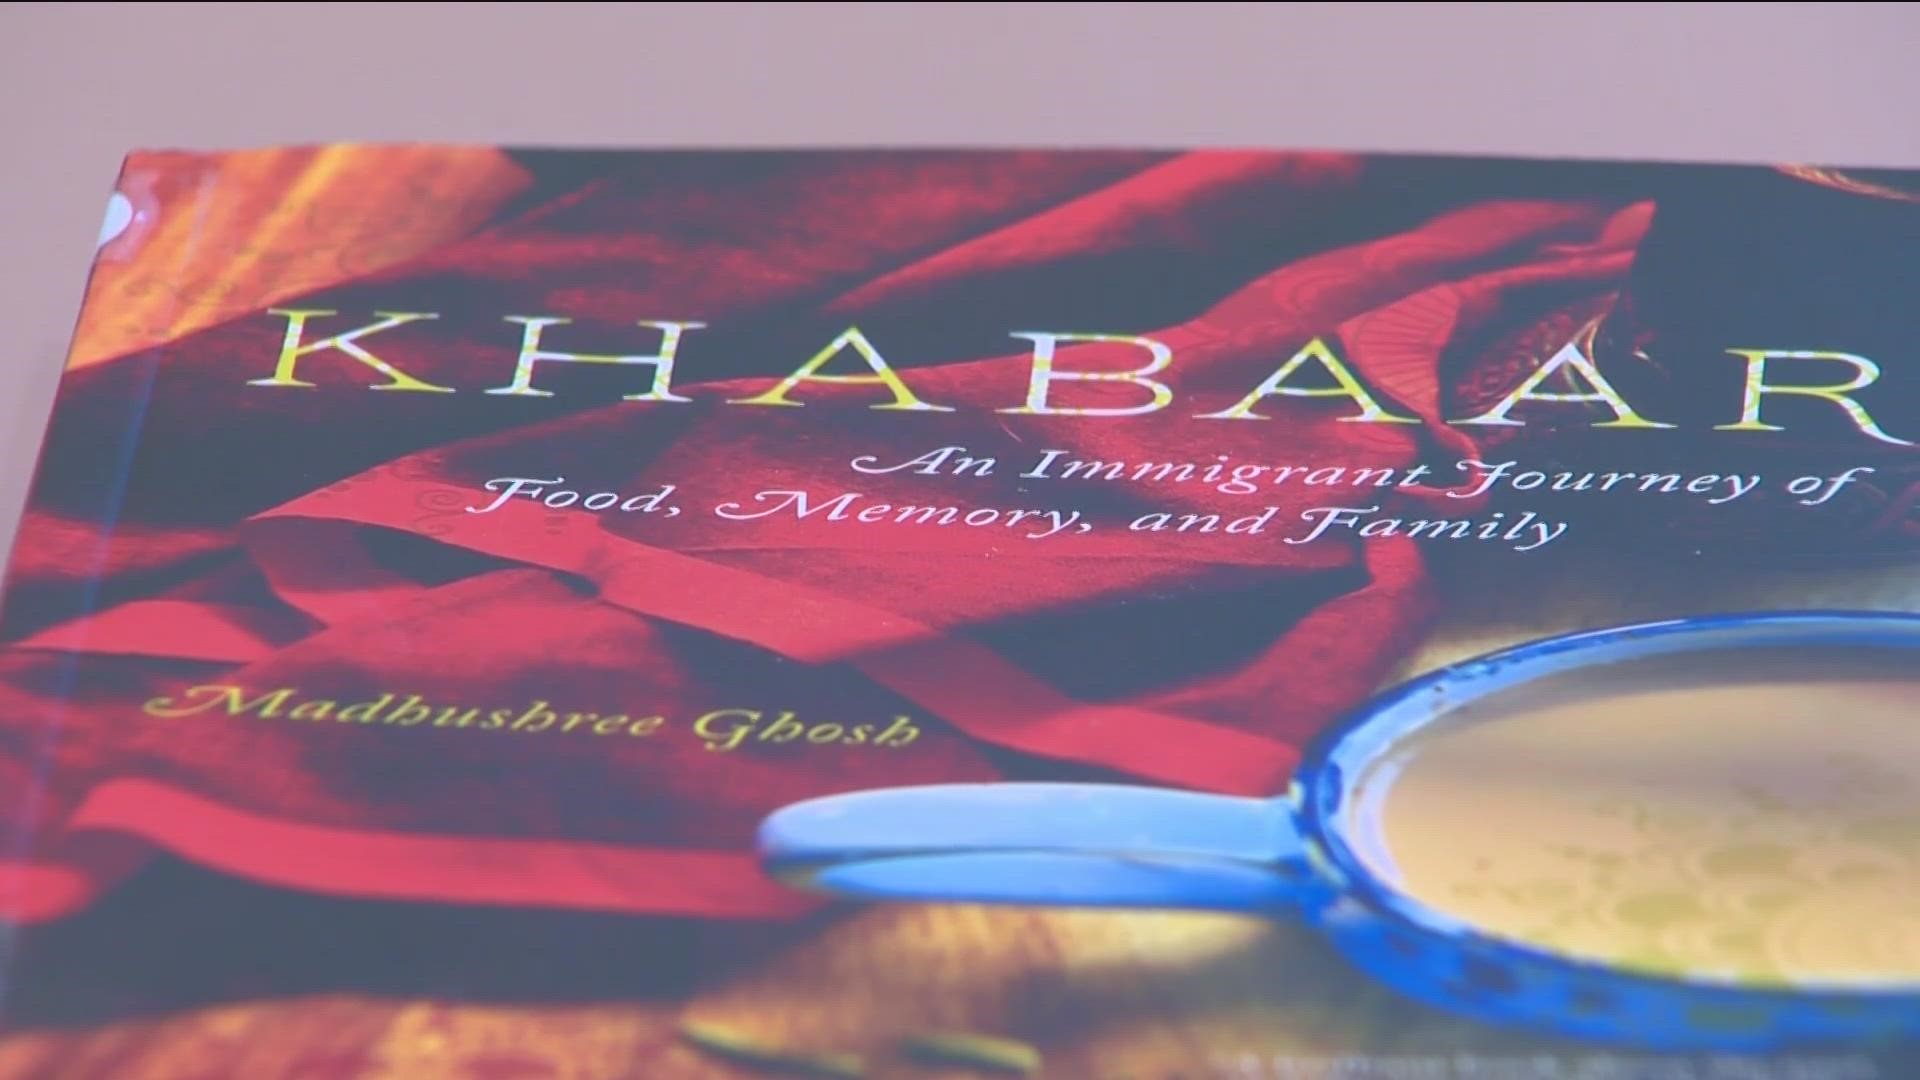 "Khabaar," by Madhushree Ghosh, touches on what it means to belong, Ada County Community Library's community engagement librarian says.